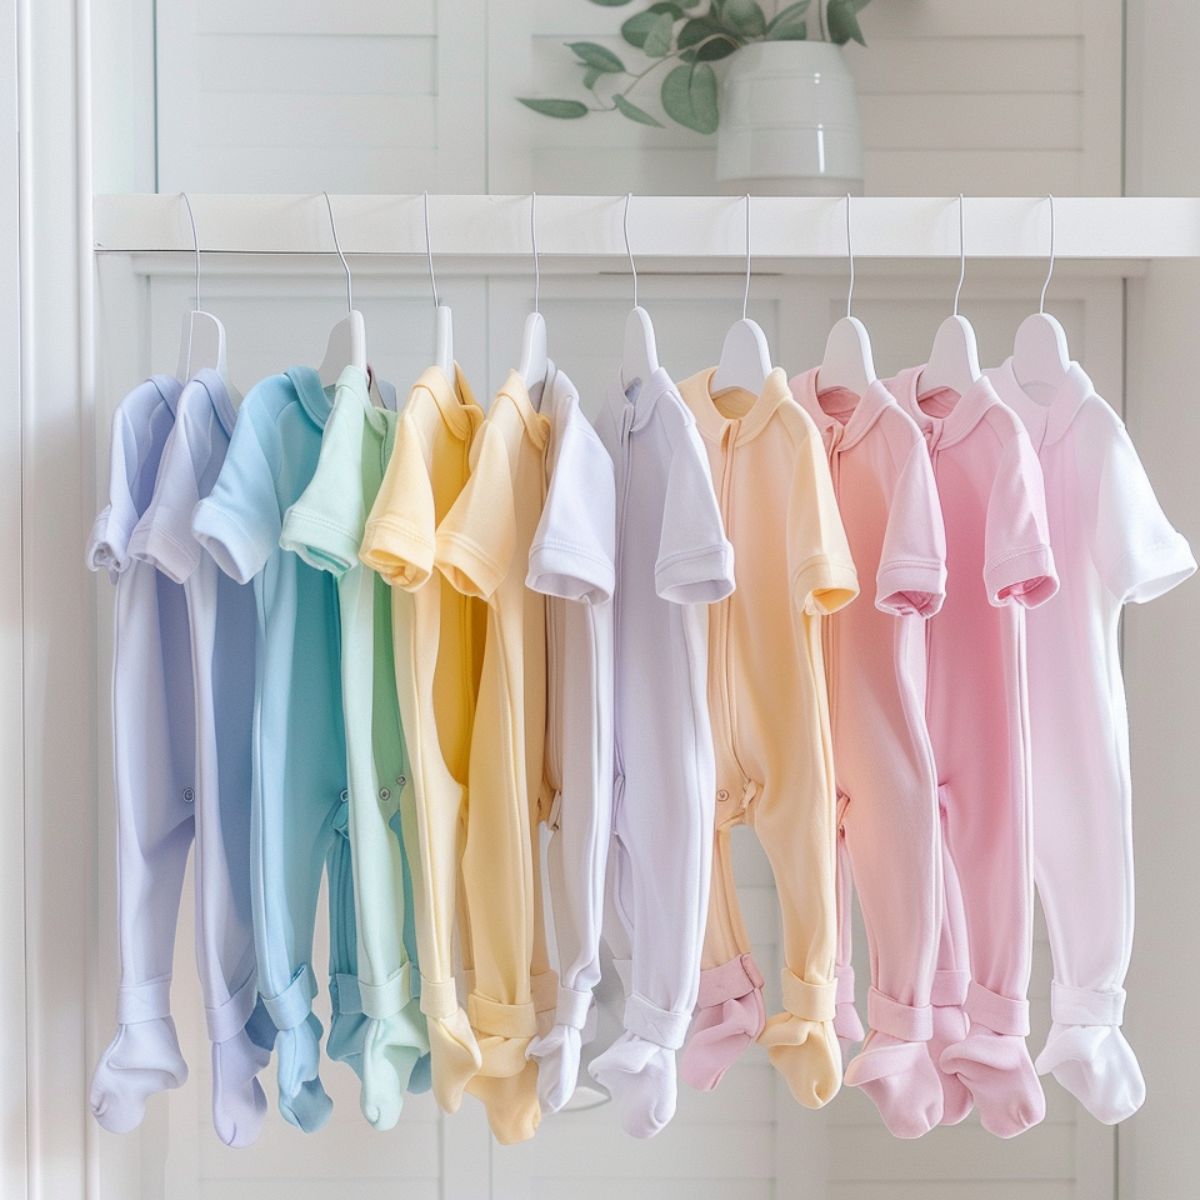 Mom of 7 Shares the Best Baby Pajamas: HonestBaby Sleep and Play Review